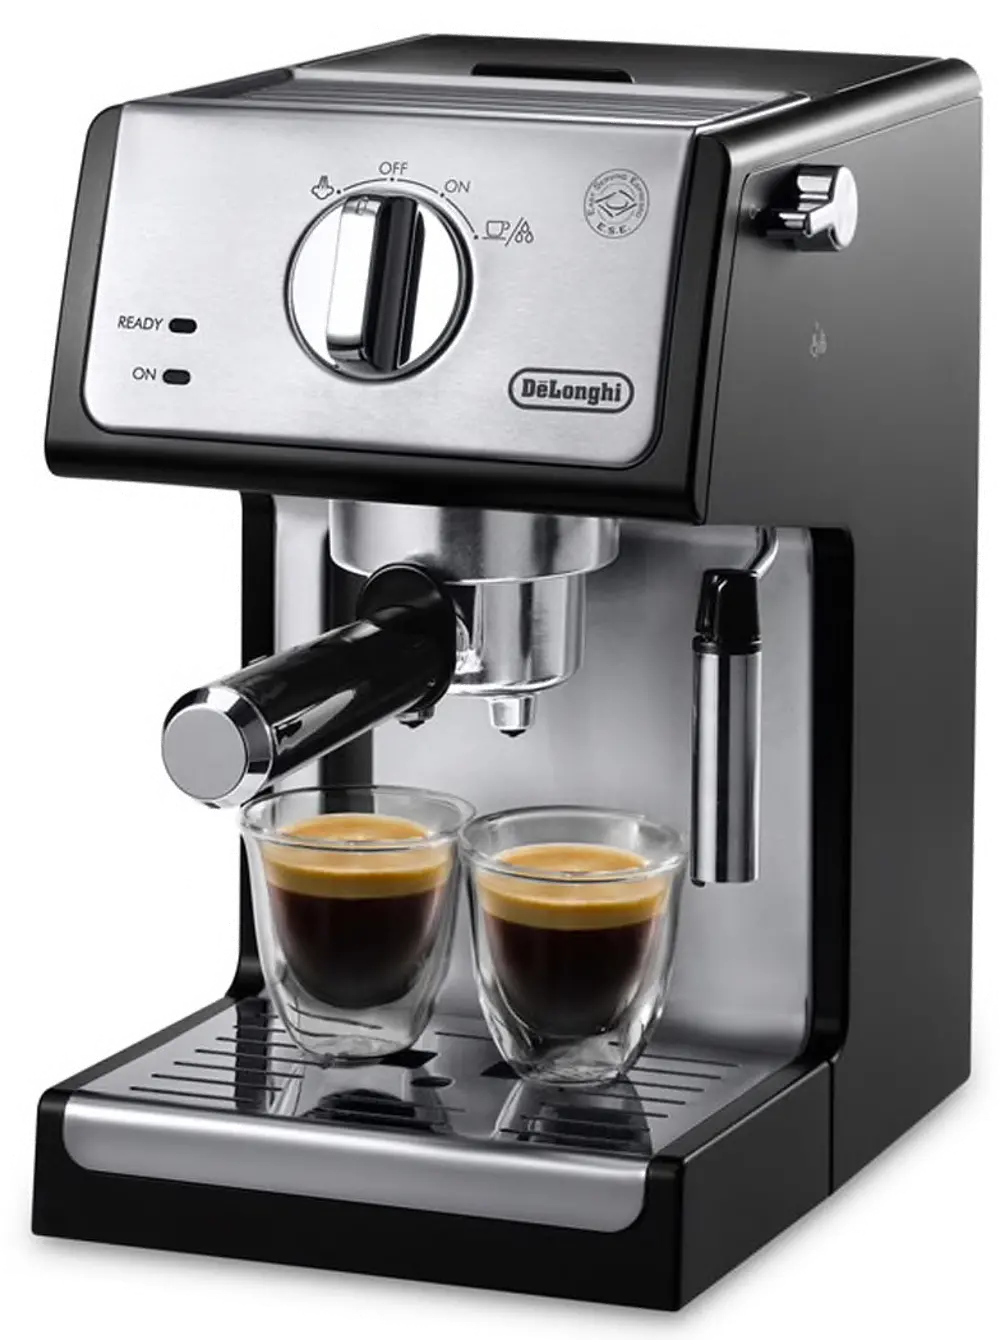 ECP3420 De'Longhi Manual Espresso Machine - Stainless Steel and Black-1